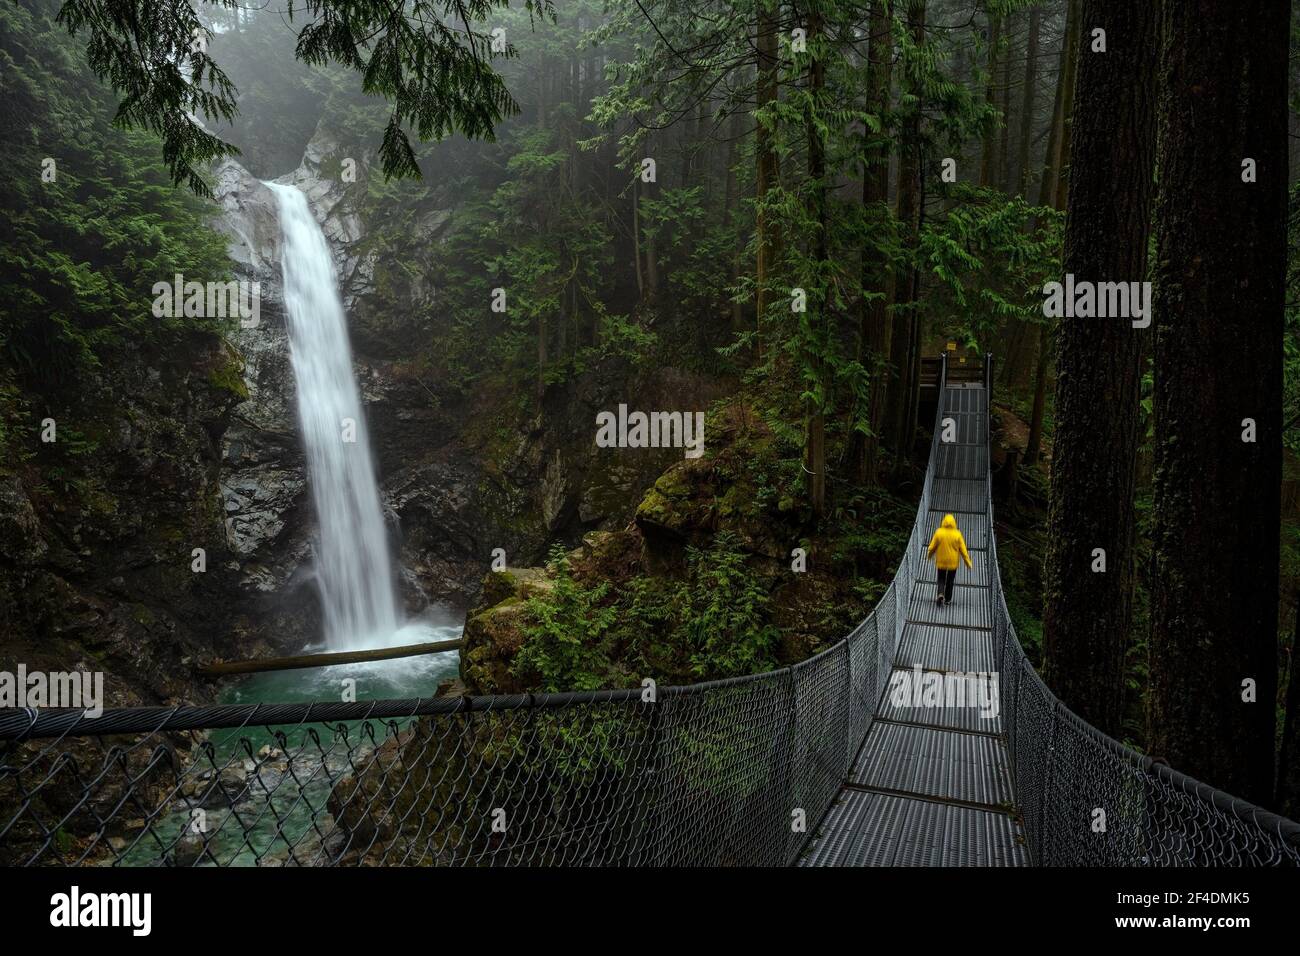 Woman in yellow rain jacket standing on a suspension bridge and watching the Cascade falls, in Cascade falls regional park, Deroche, British Columbia, Stock Photo